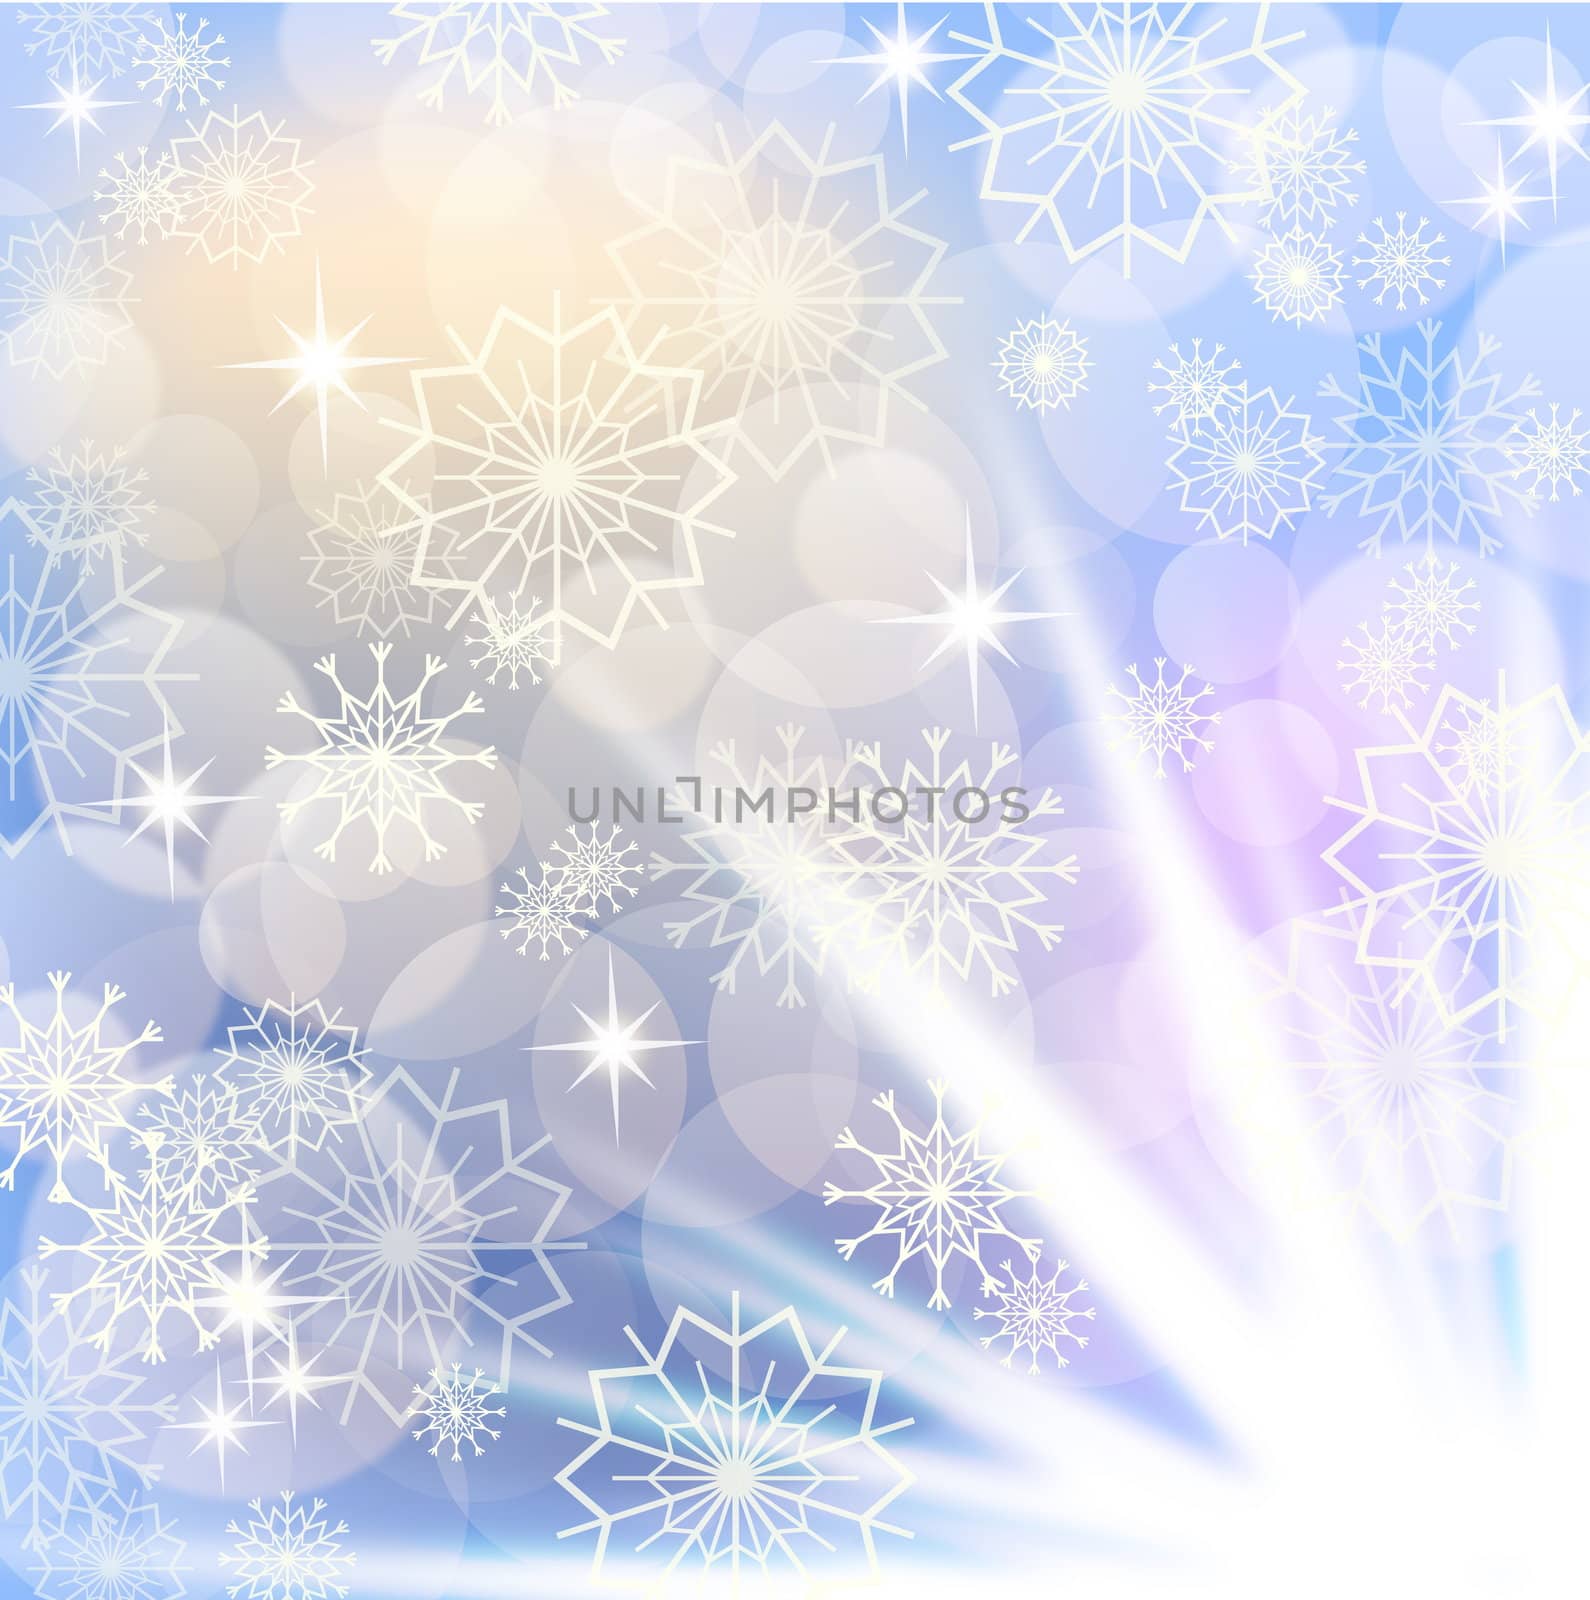 Christmas background with white snowflakes and fireworks